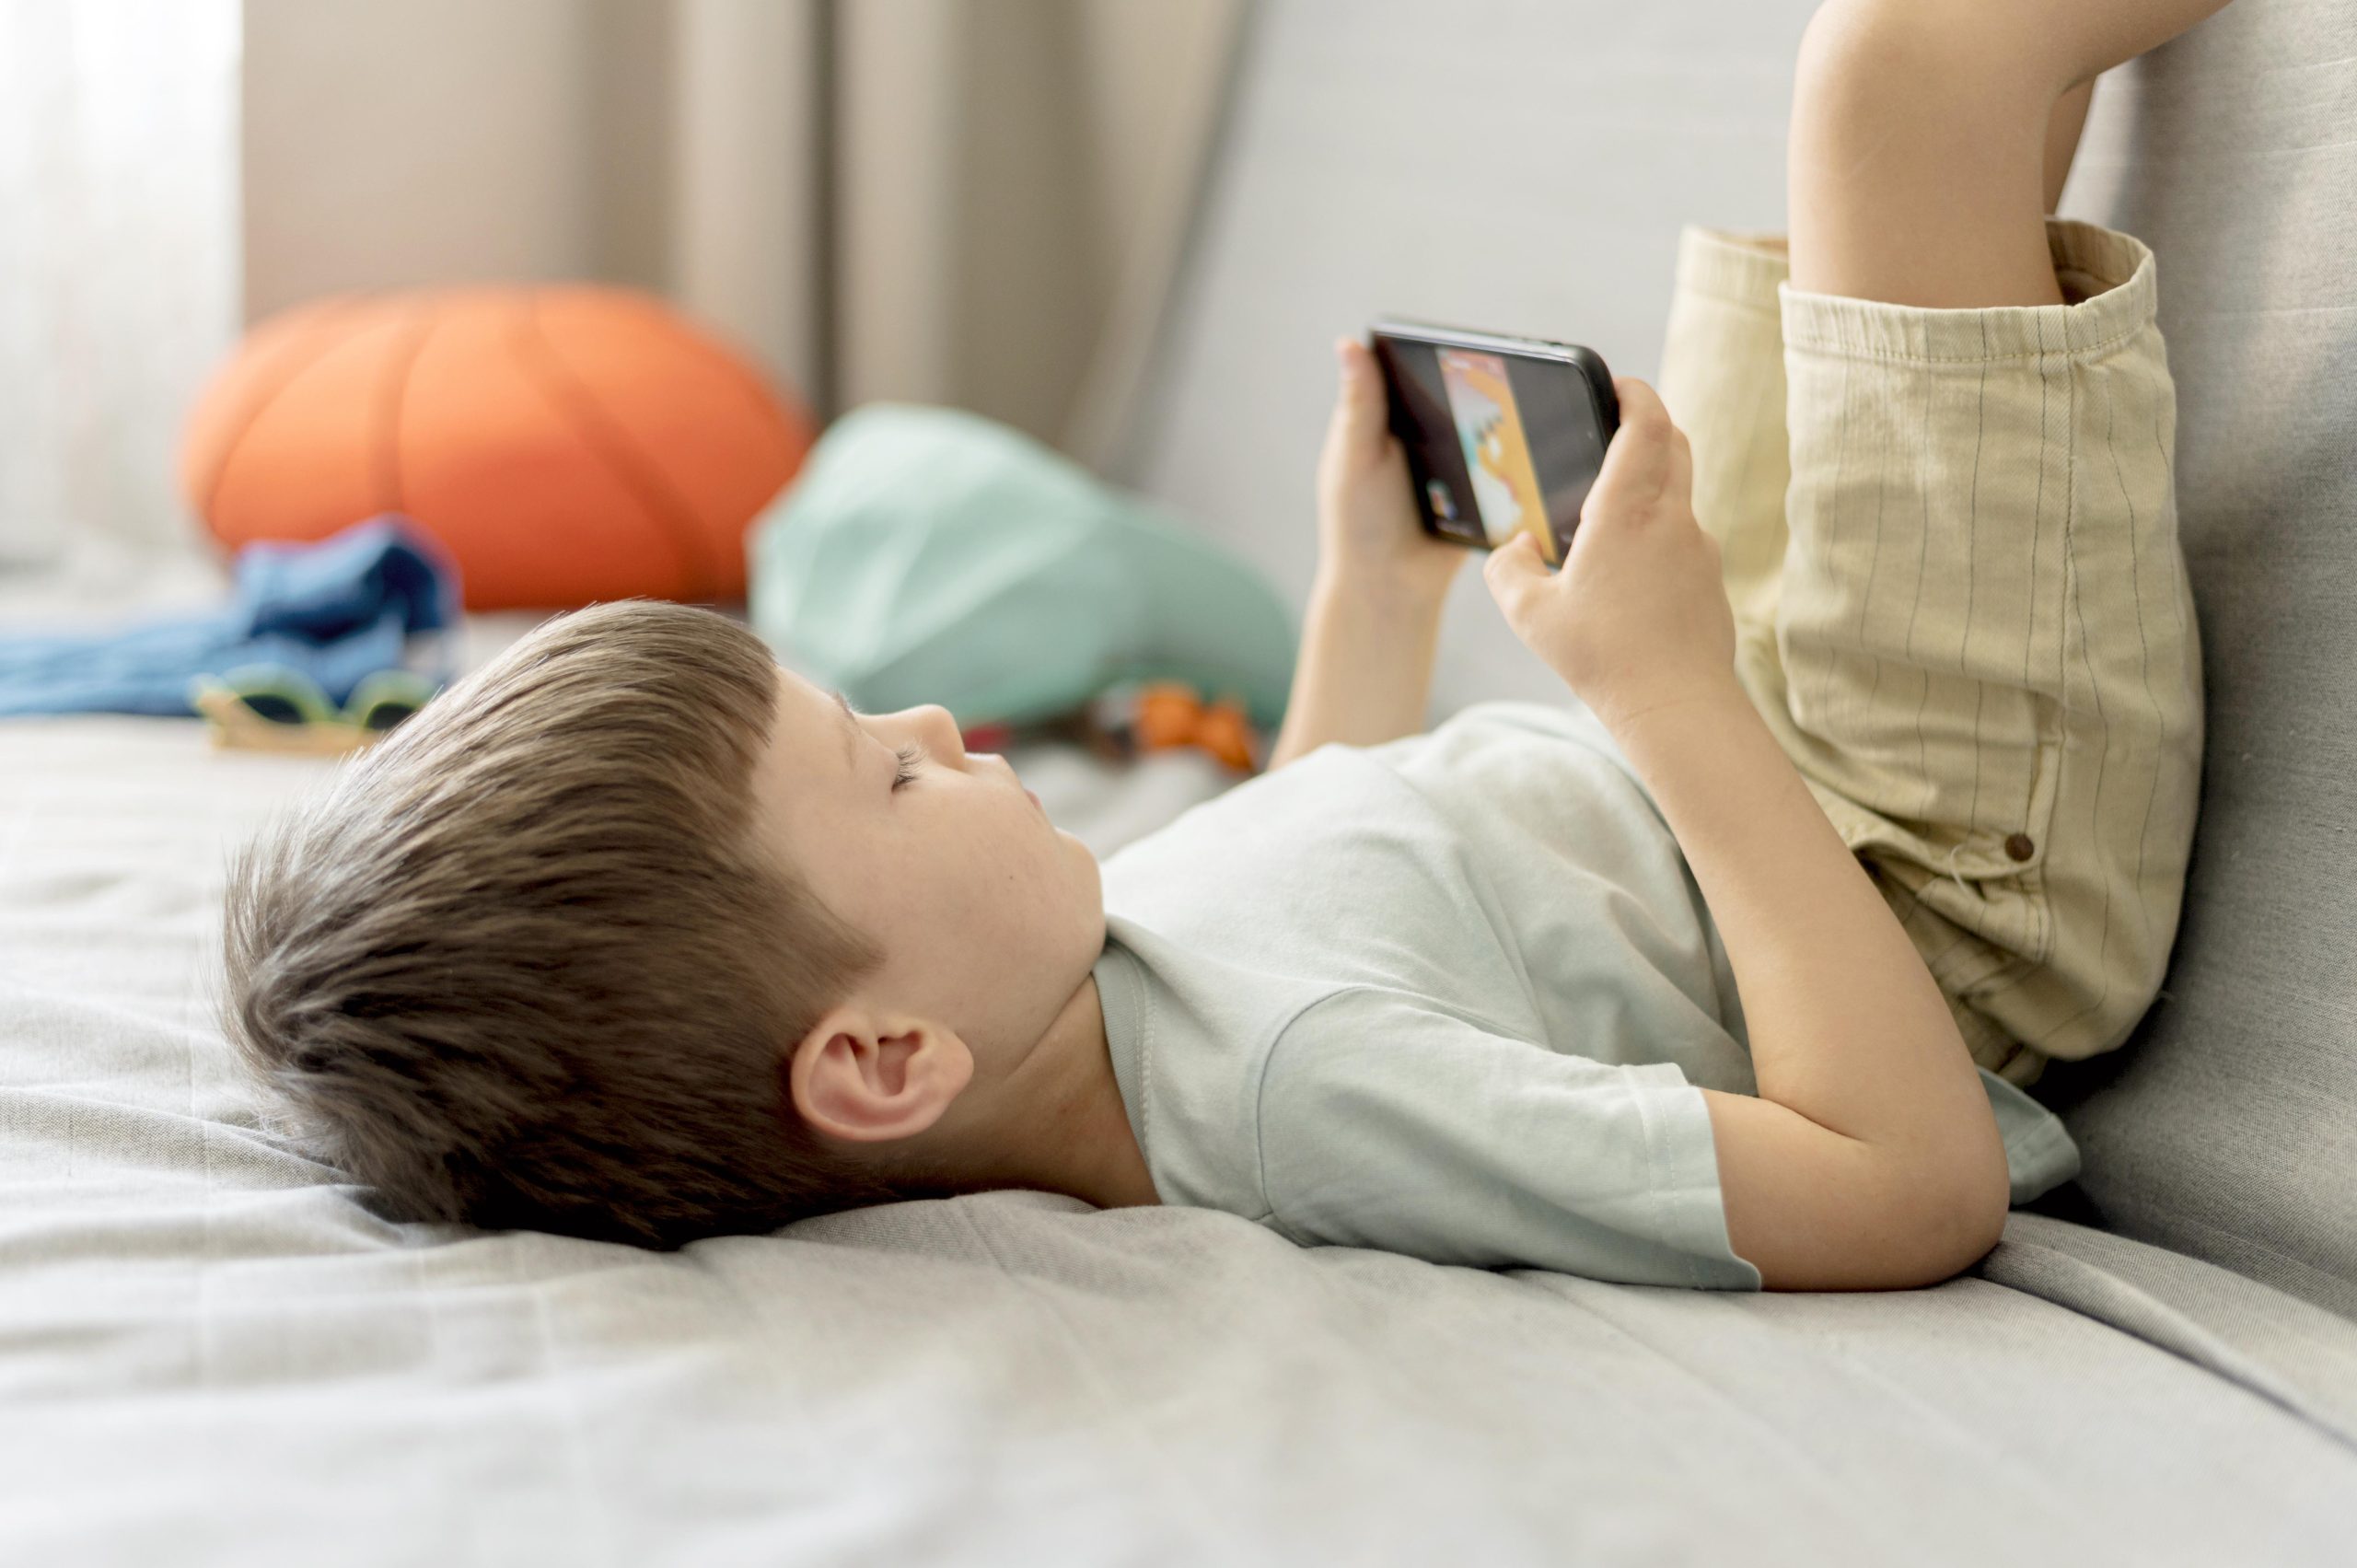 How to Limit TikTok Usage and Encourage Productive Activities for Kids